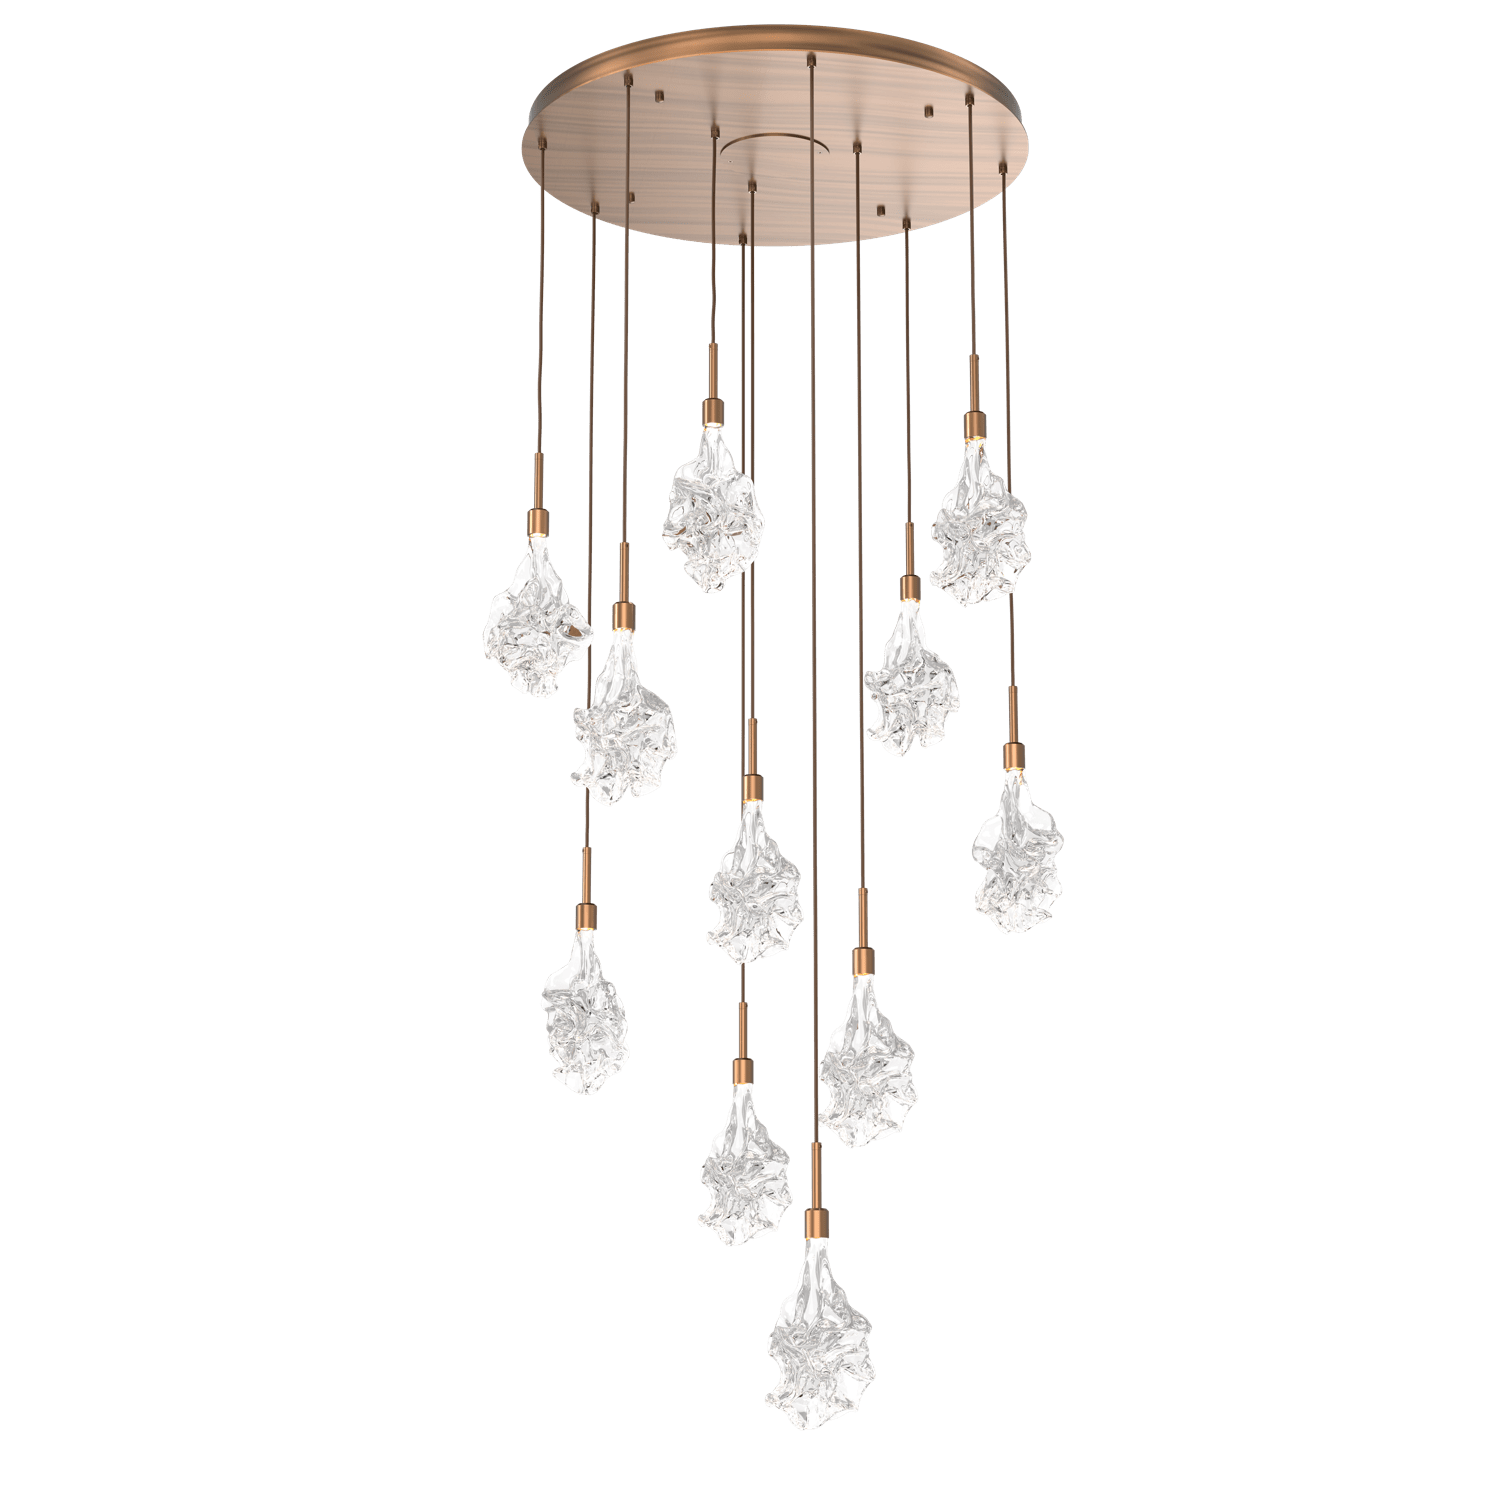 CHB0059-11-RB-Hammerton-Studio-Blossom-11-light-round-pendant-chandelier-with-oil-rubbed-bronze-finish-and-clear-handblown-crystal-glass-shades-and-LED-lamping